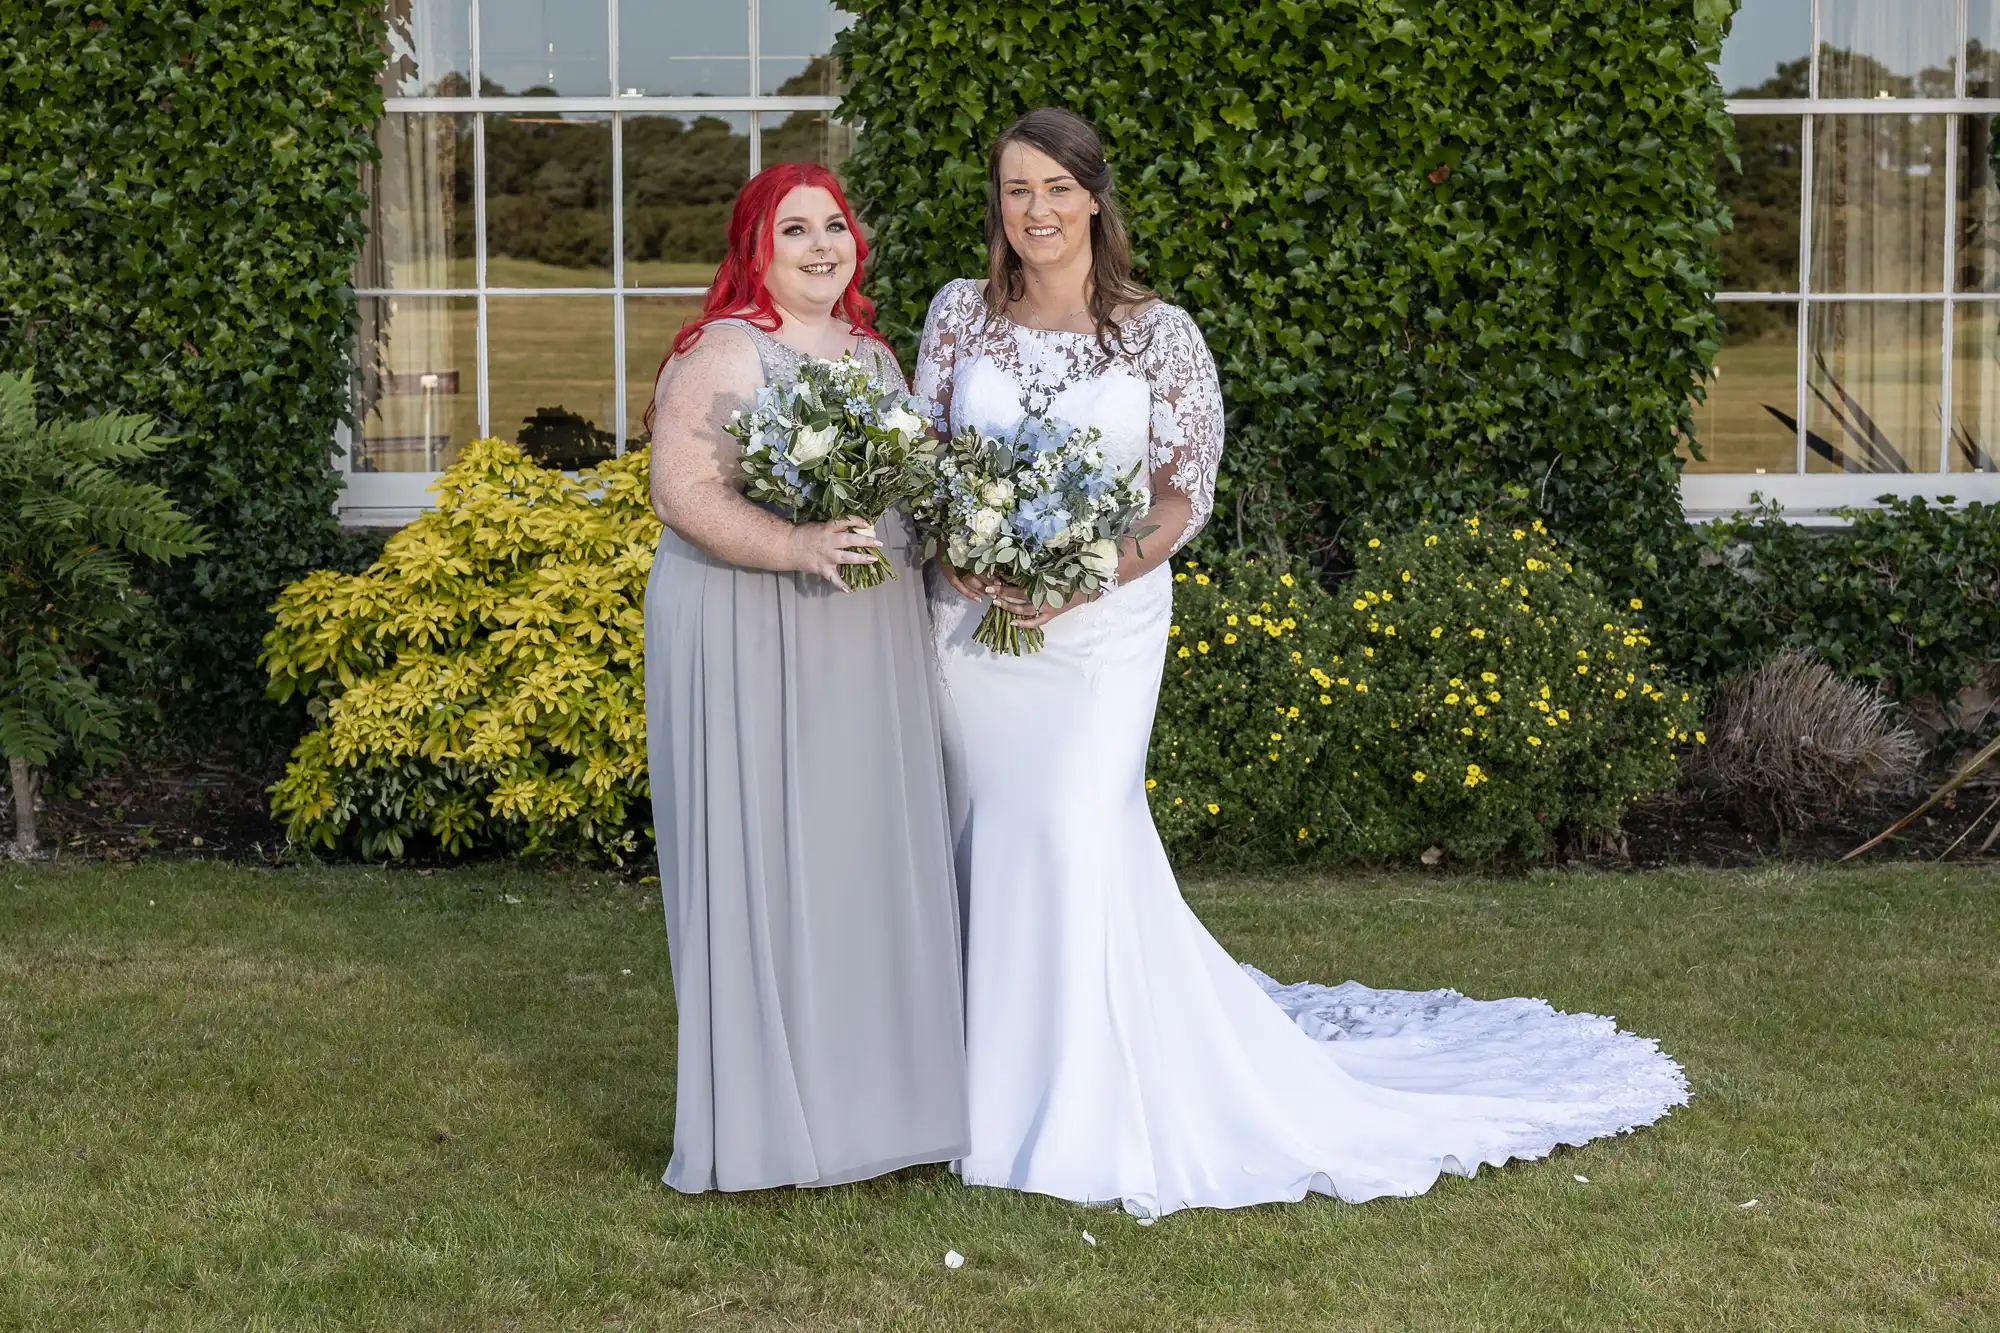 Two women, one in a white wedding dress and the other in a gray gown, holding bouquets and smiling in a garden with a building in the background.